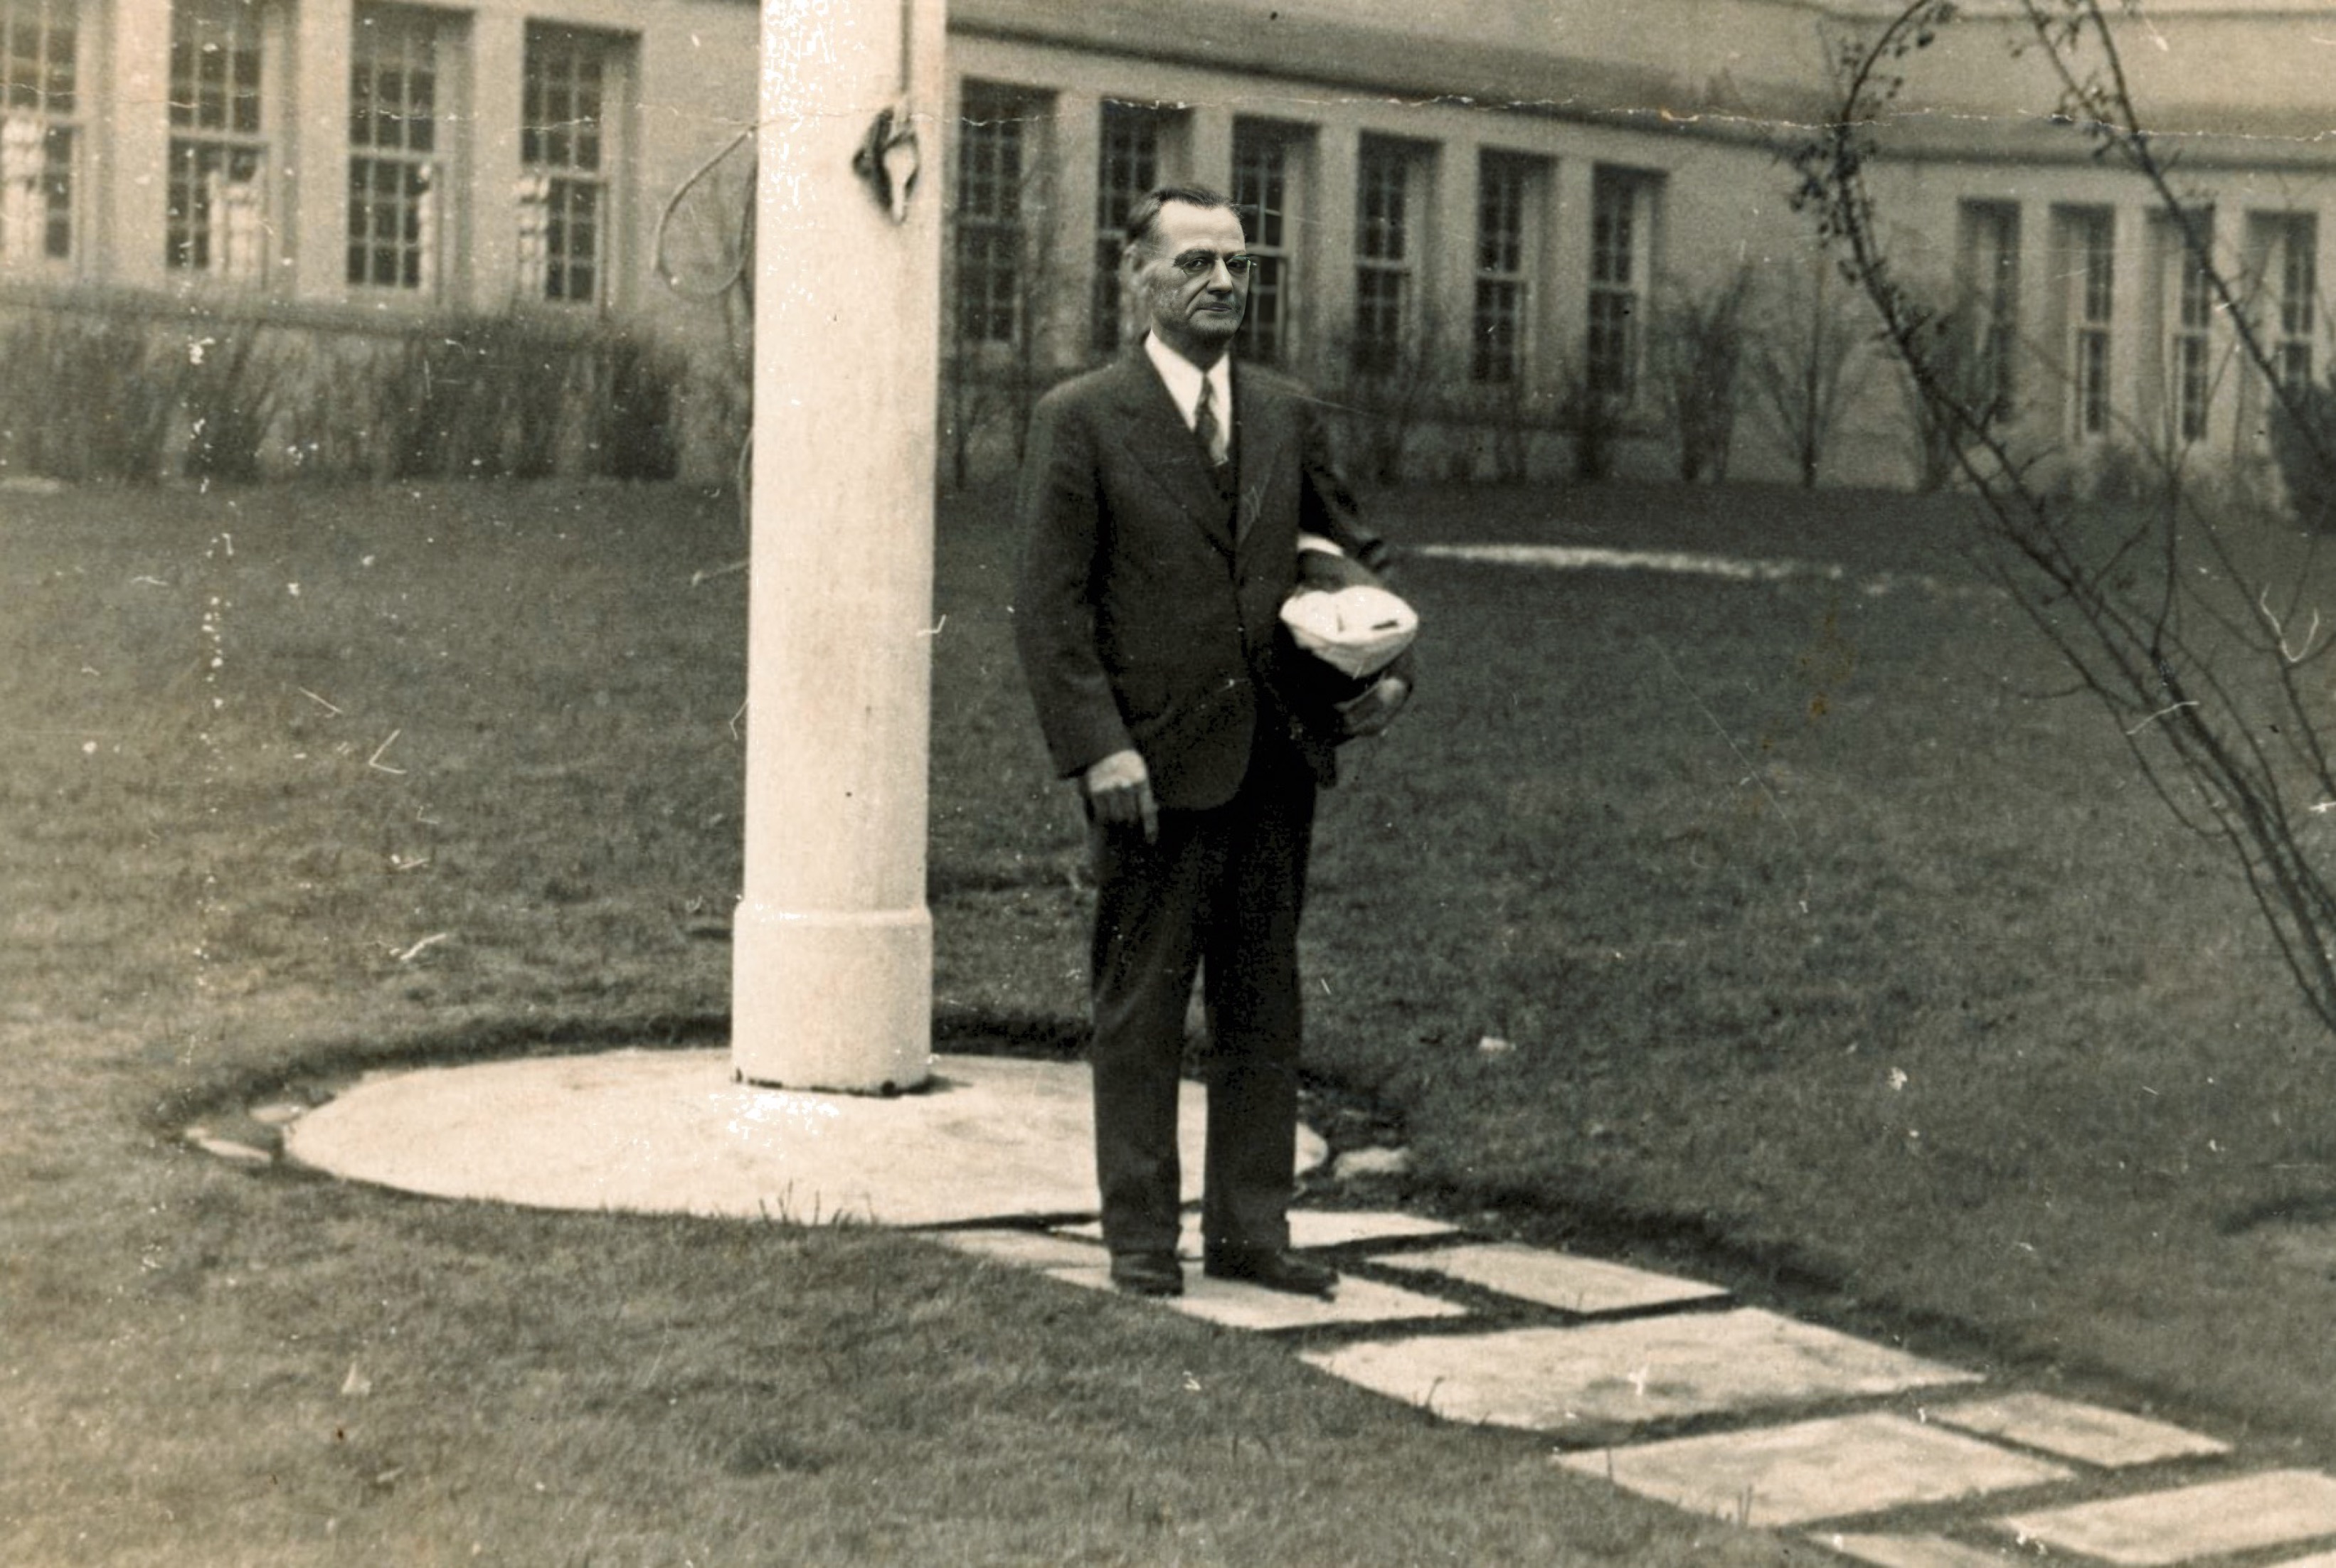 Charles T Mellen takes down flag at Bayside High School on the day of his retirement on 16 February 1941 at the age of 62